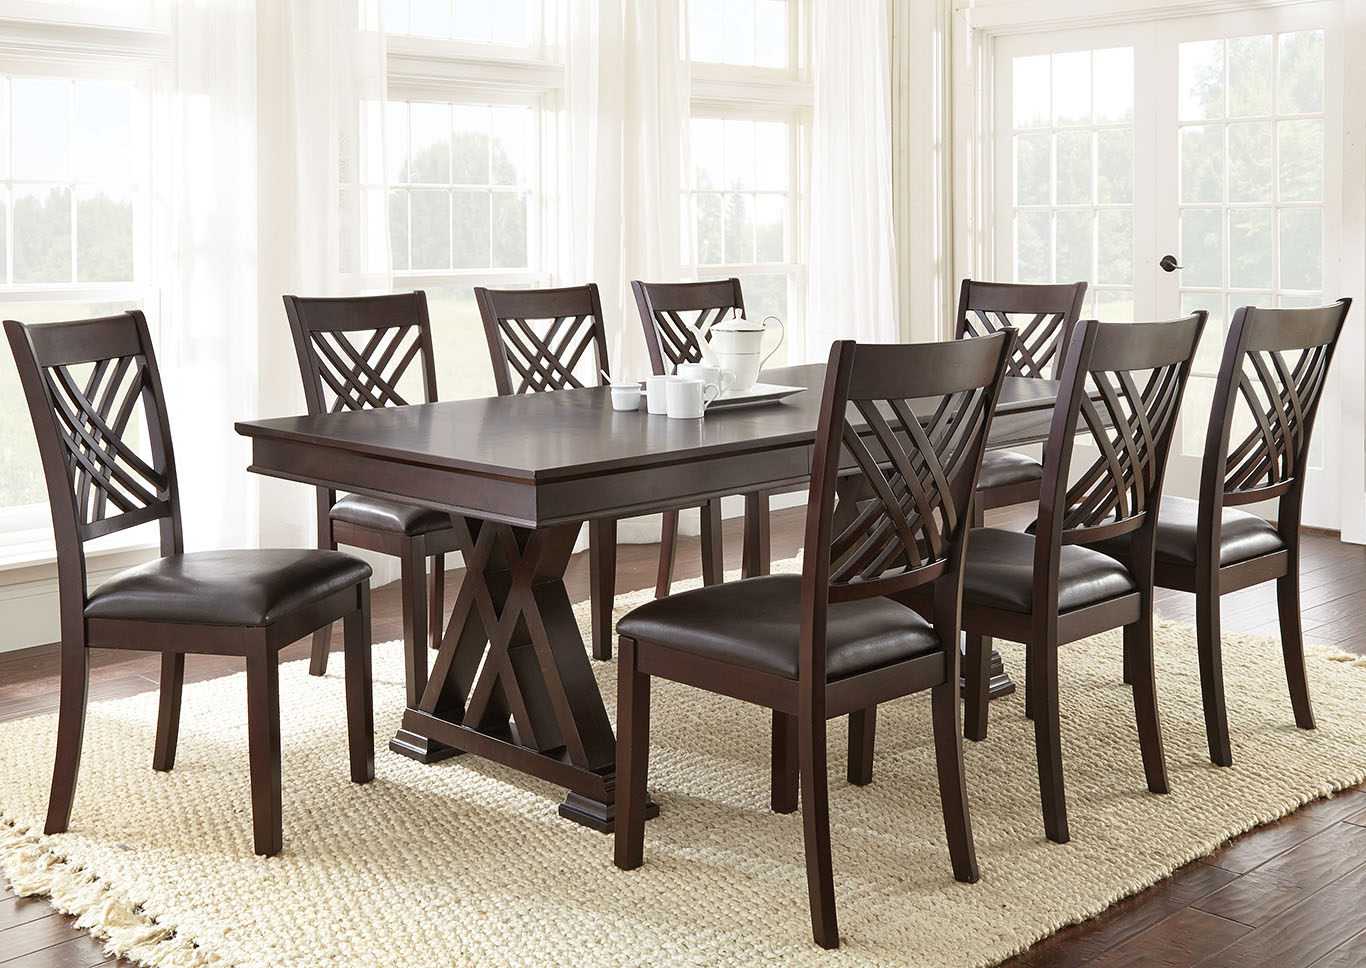 Adrian Brown Rectangular Dining Set W/ 6 Chairs,Steve Silver